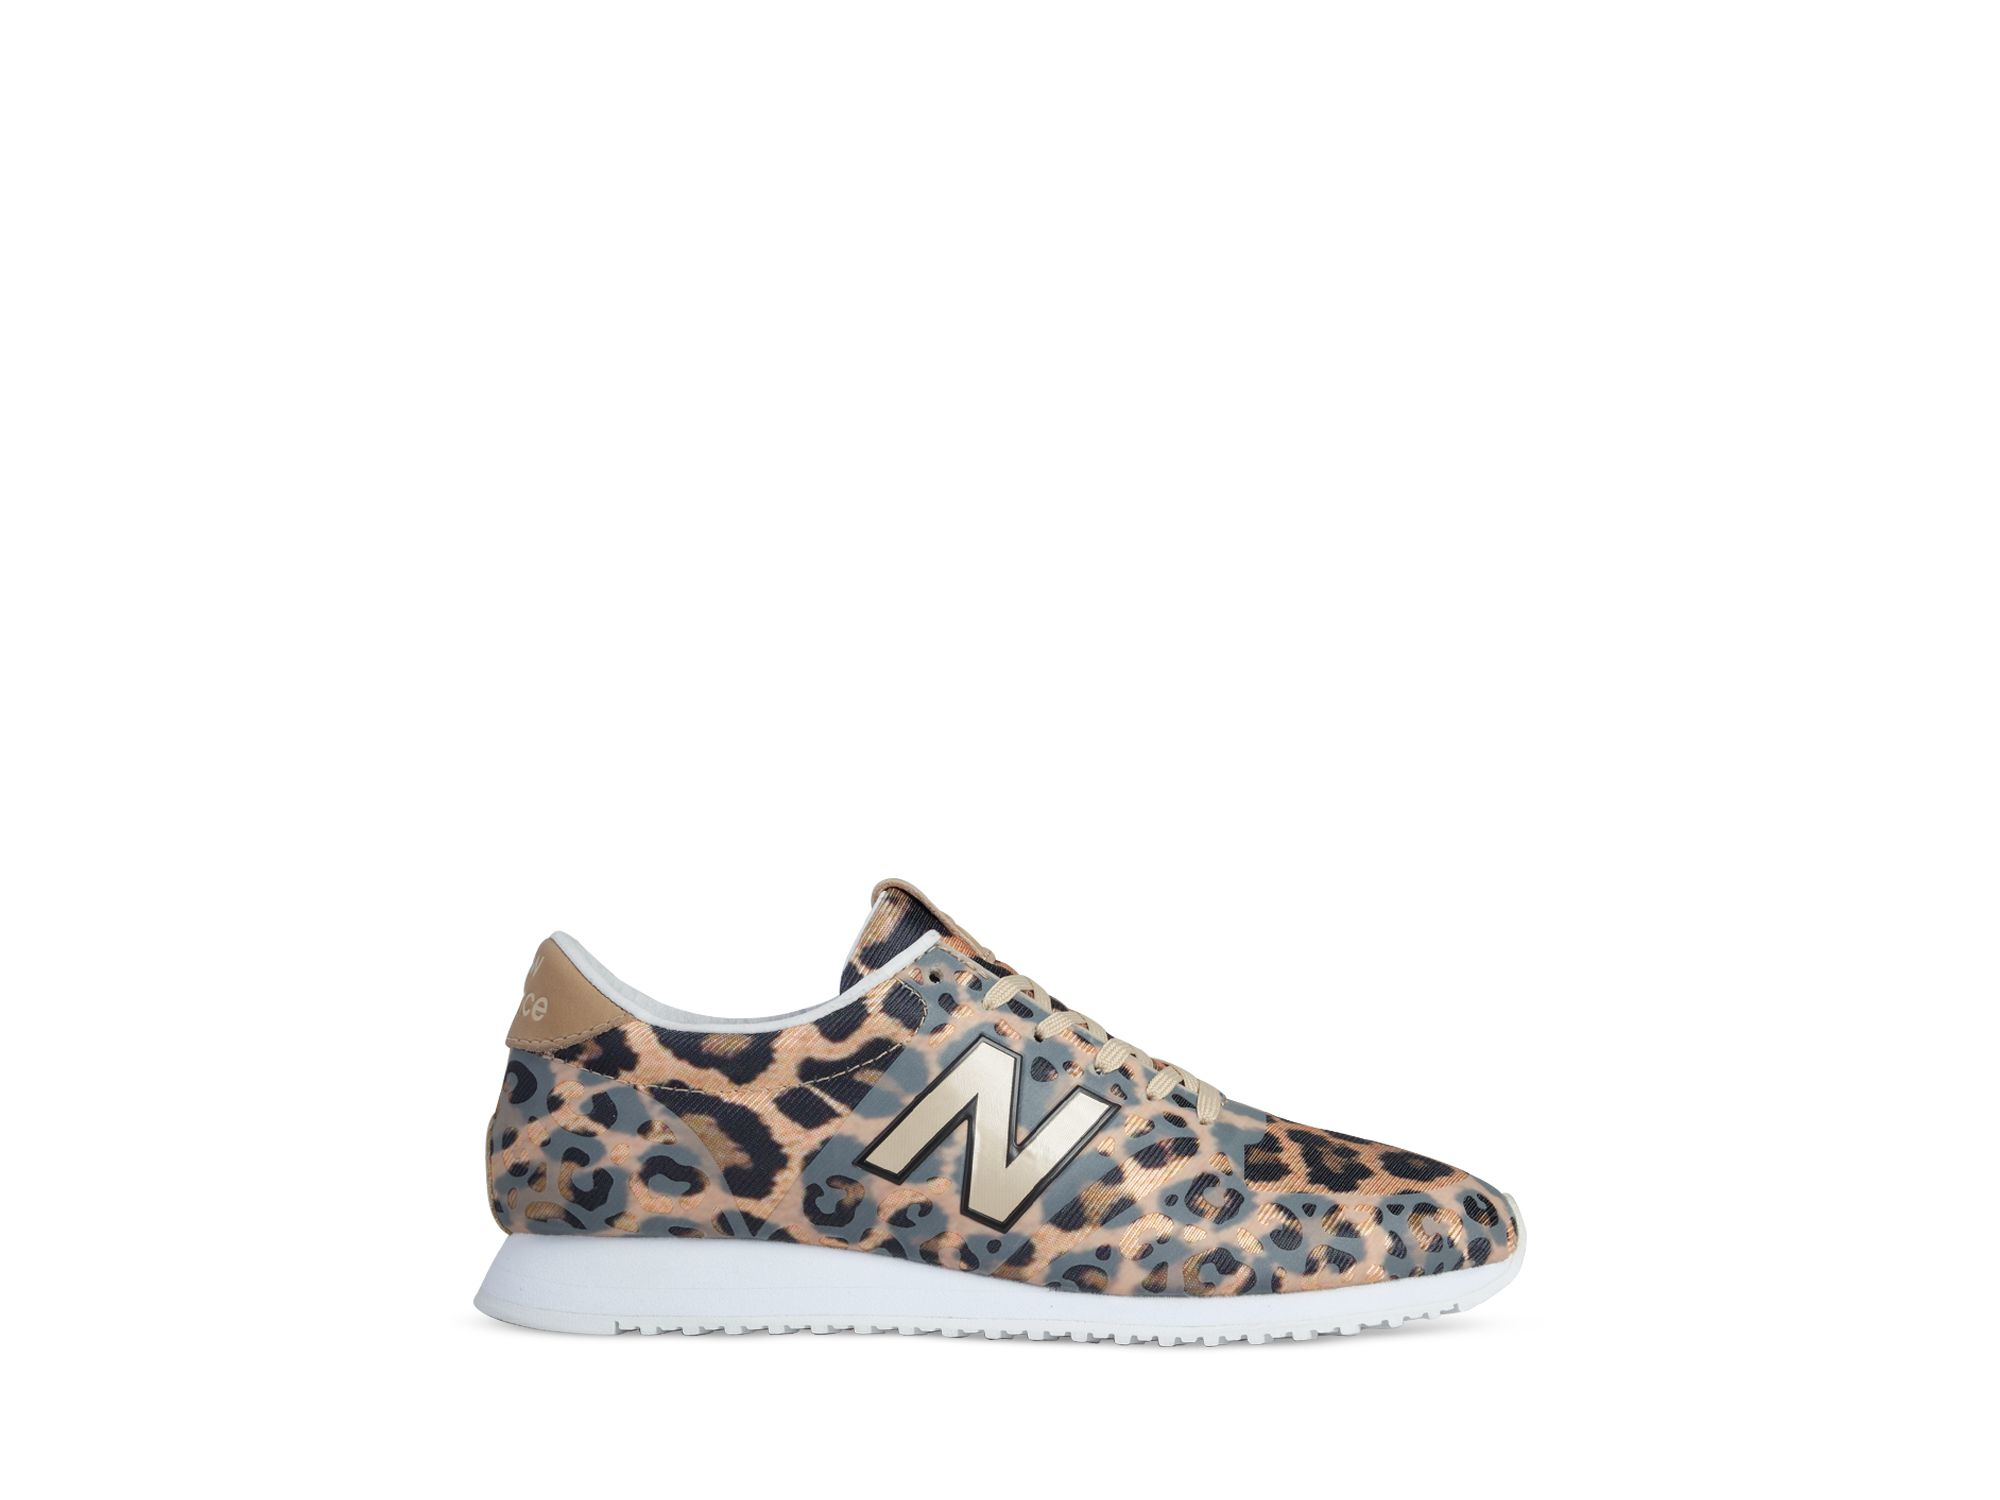 september beddengoed actrice New Balance Leopard Print 420 Sneakers | Lyst